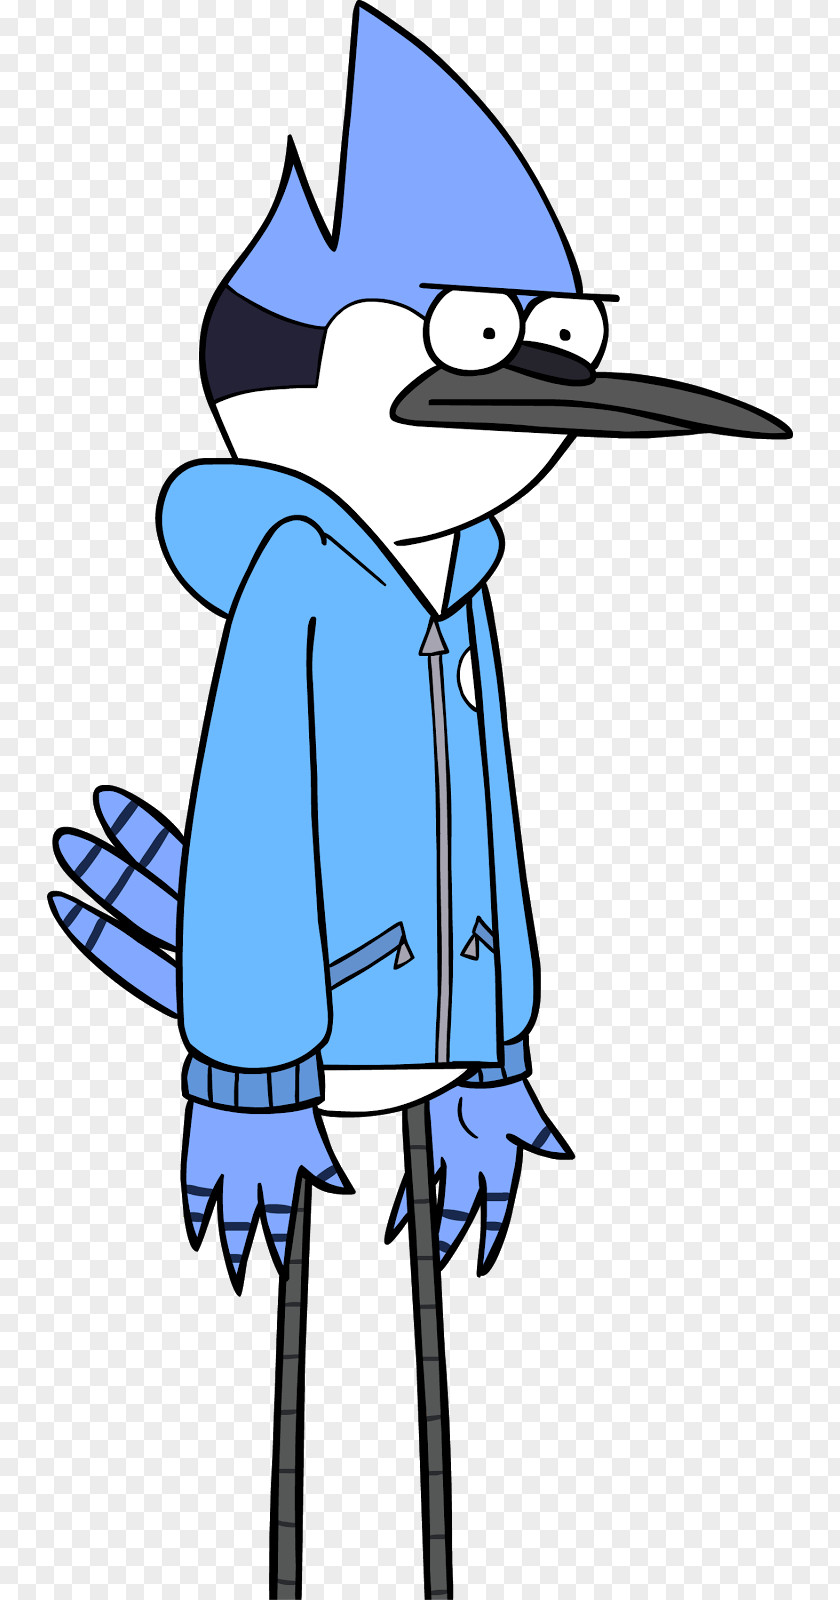 Show Mordecai Trunks Animation Cartoon Network PNG